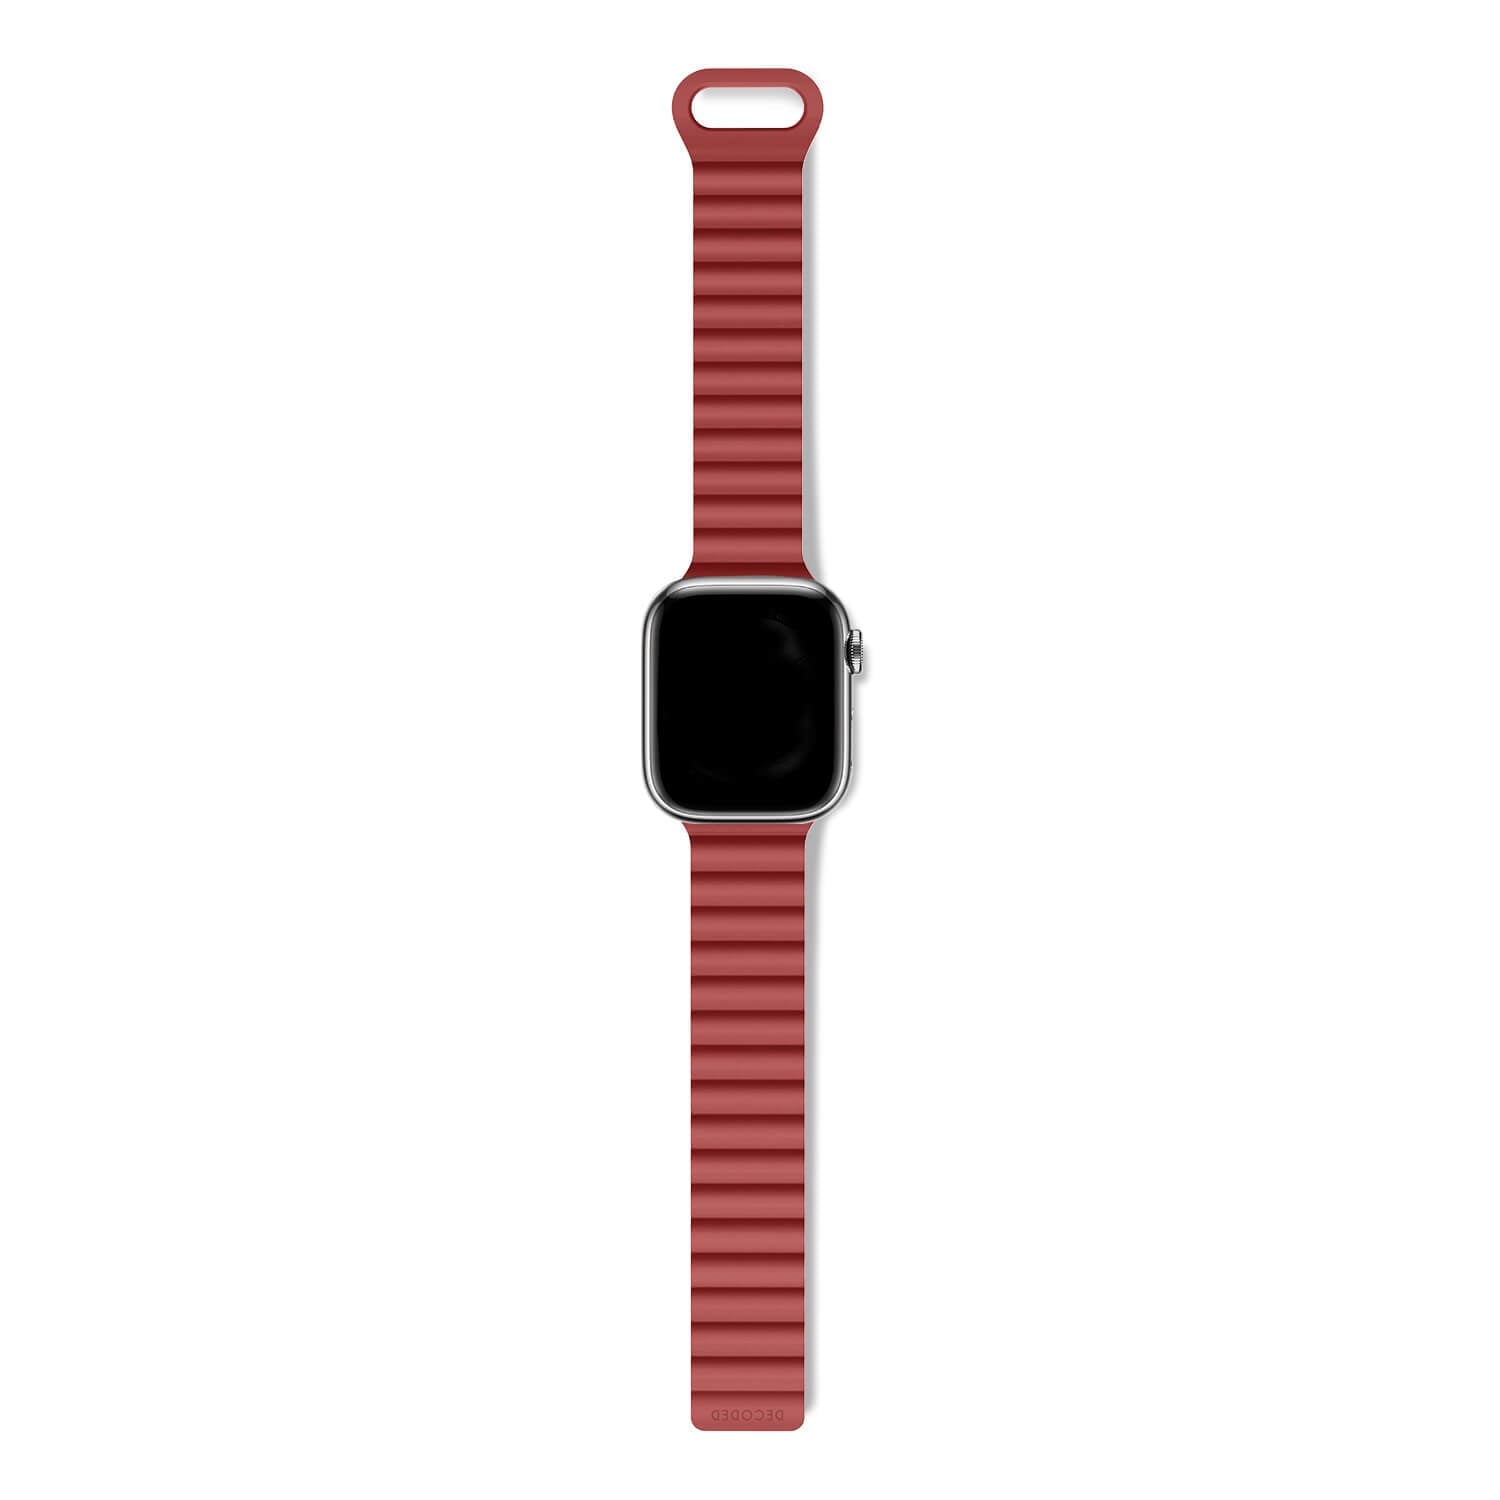 Silicone Traction Loop Strap Apple Watch 44mm, Astro Dust